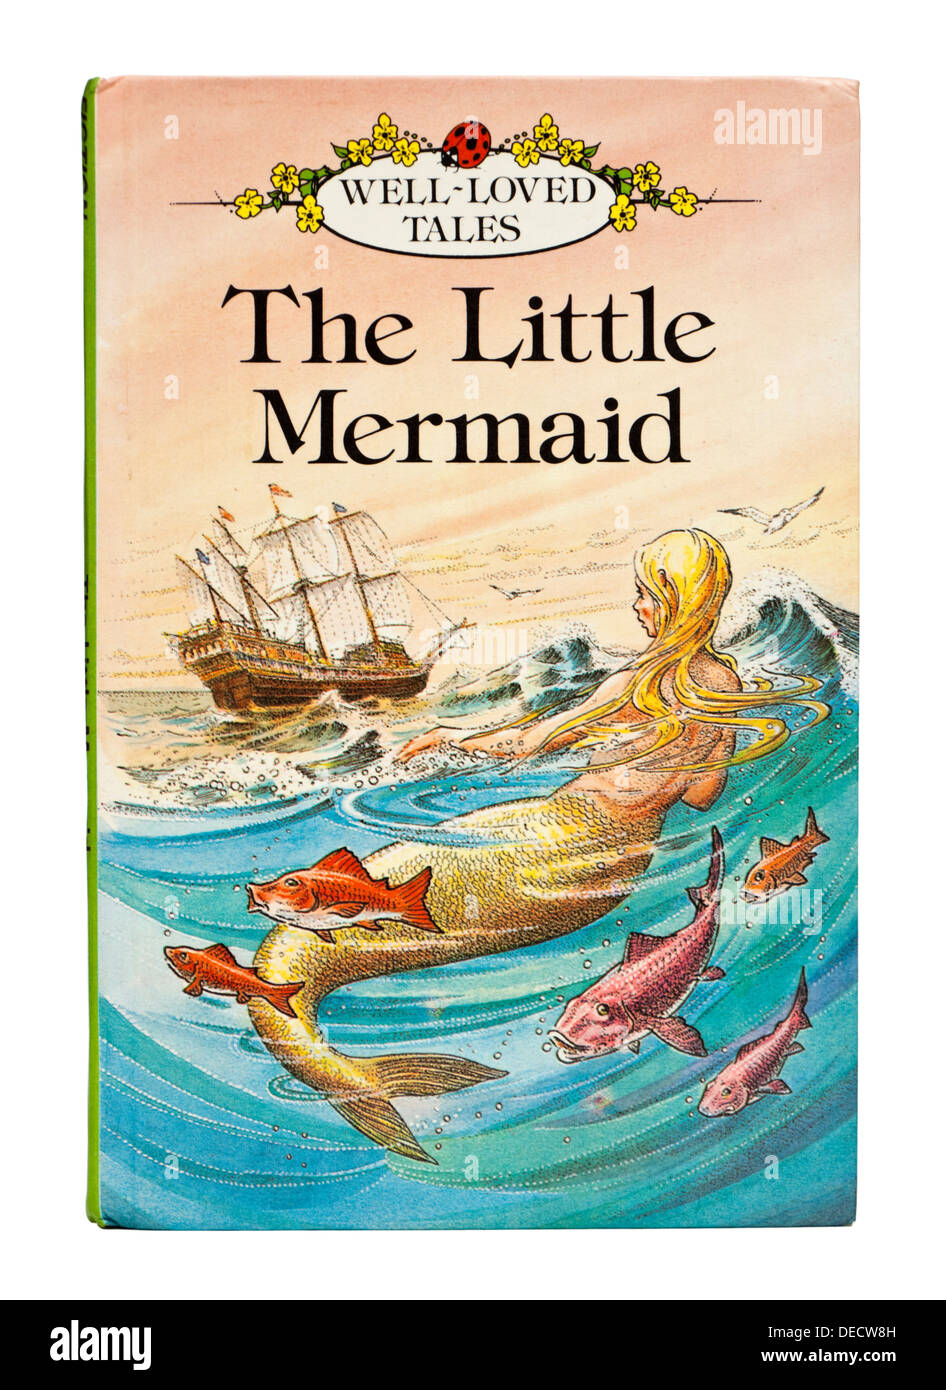 Vintage 1980 first edition Ladybird children's book 'The Little Mermaid' (Well-Loved Tales Series) Stock Photo